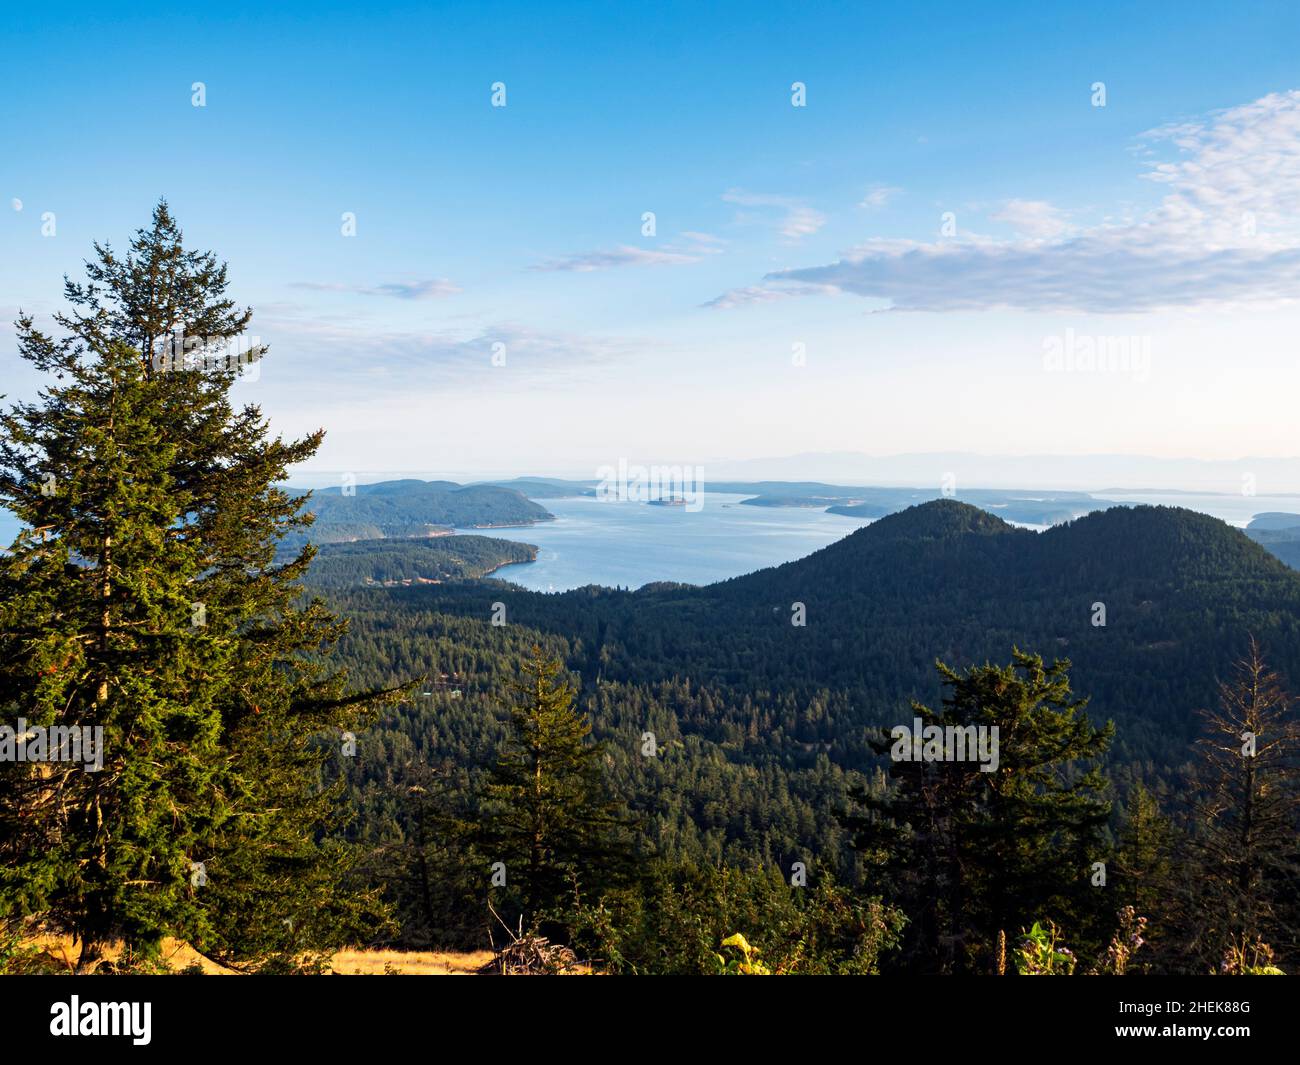 WA21051-00...WASHINGTON - Cascade Bay and Orcas Island viewed from the Mount Constitution Road. Stock Photo